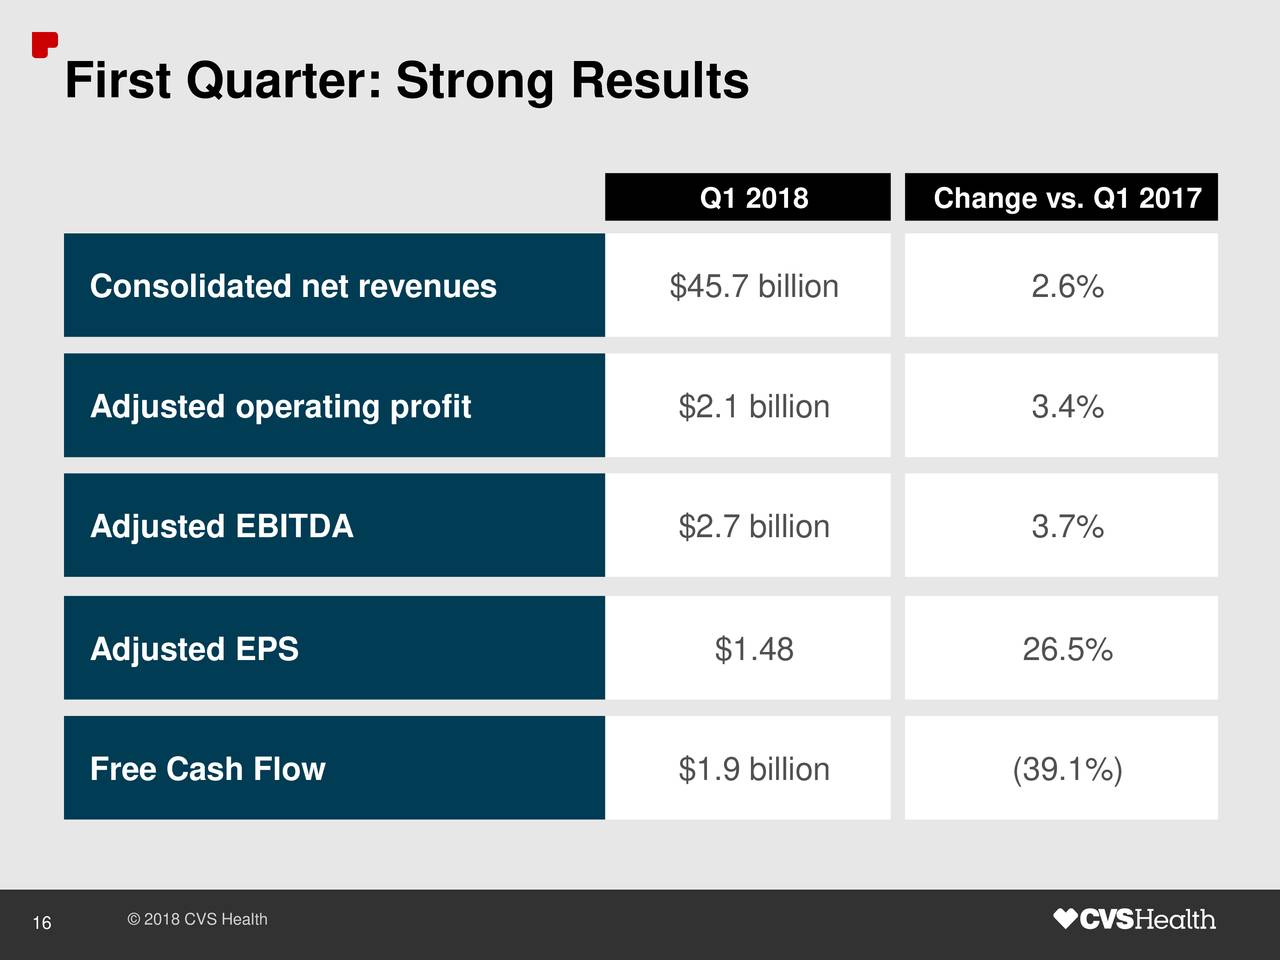 First Quarter: Strong Results